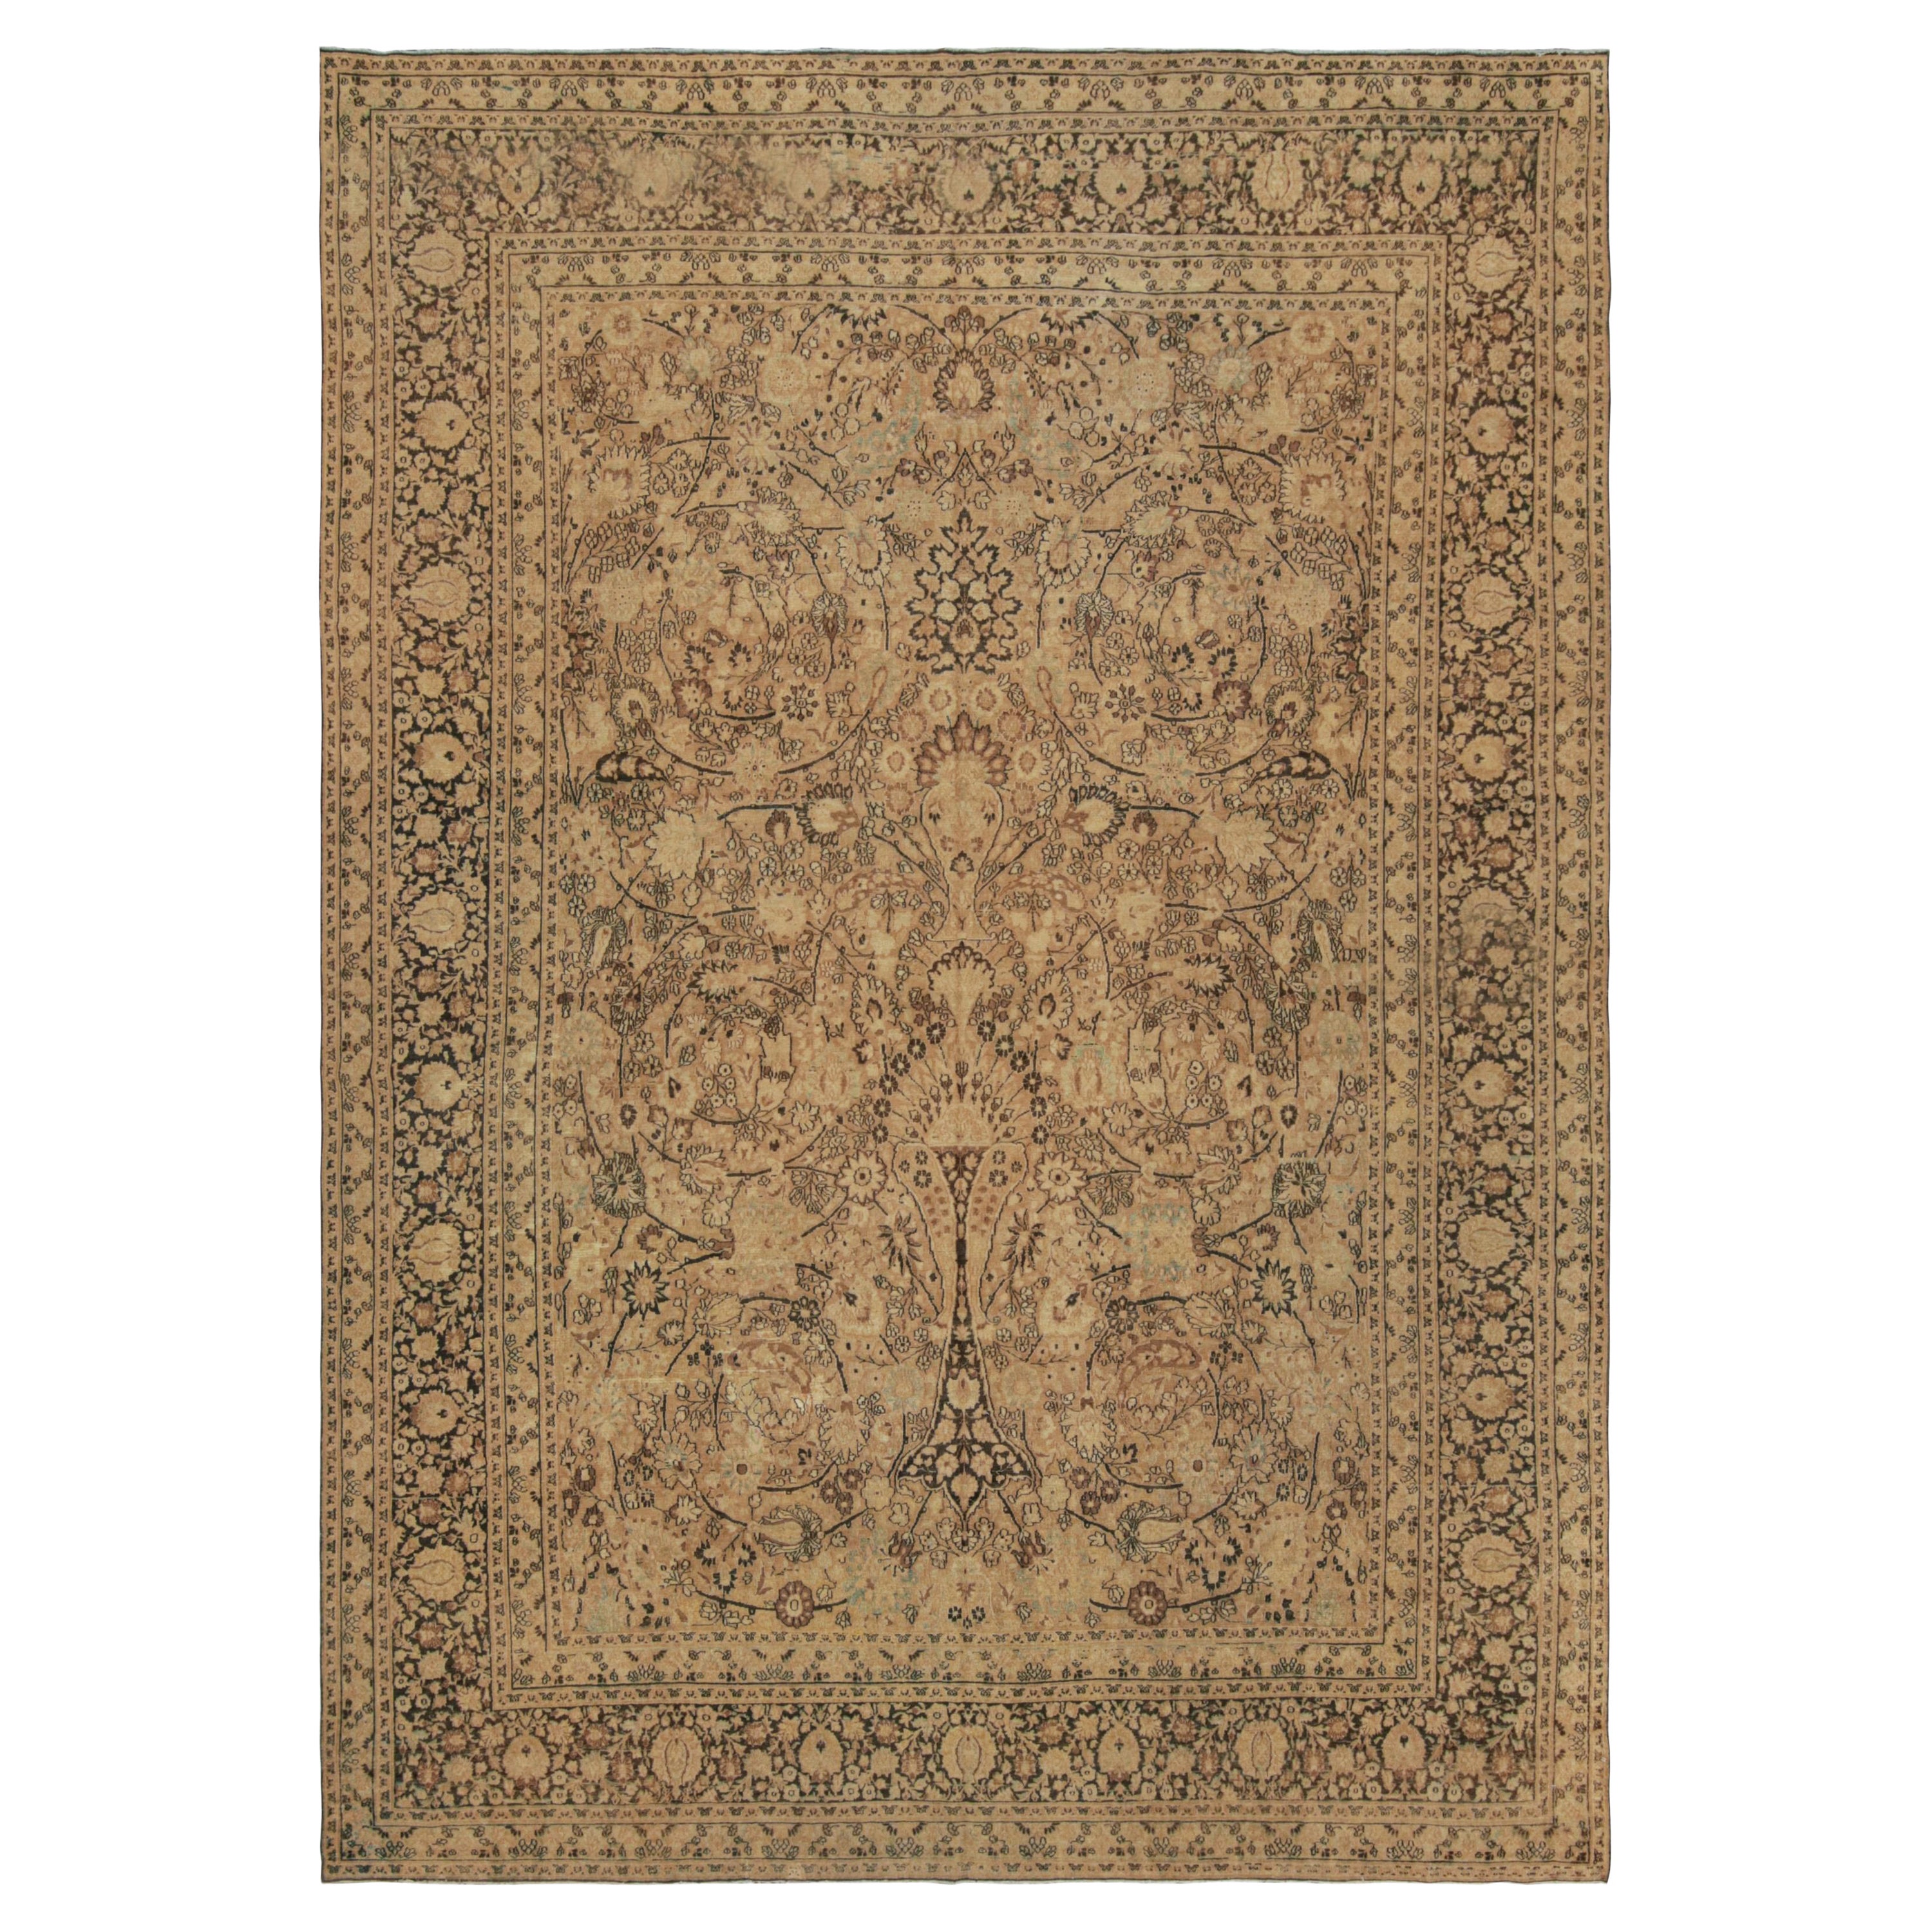 Antique Doroksh Persian Rug with Beige-Brown Floral Patterns, from Rug & Kilim For Sale